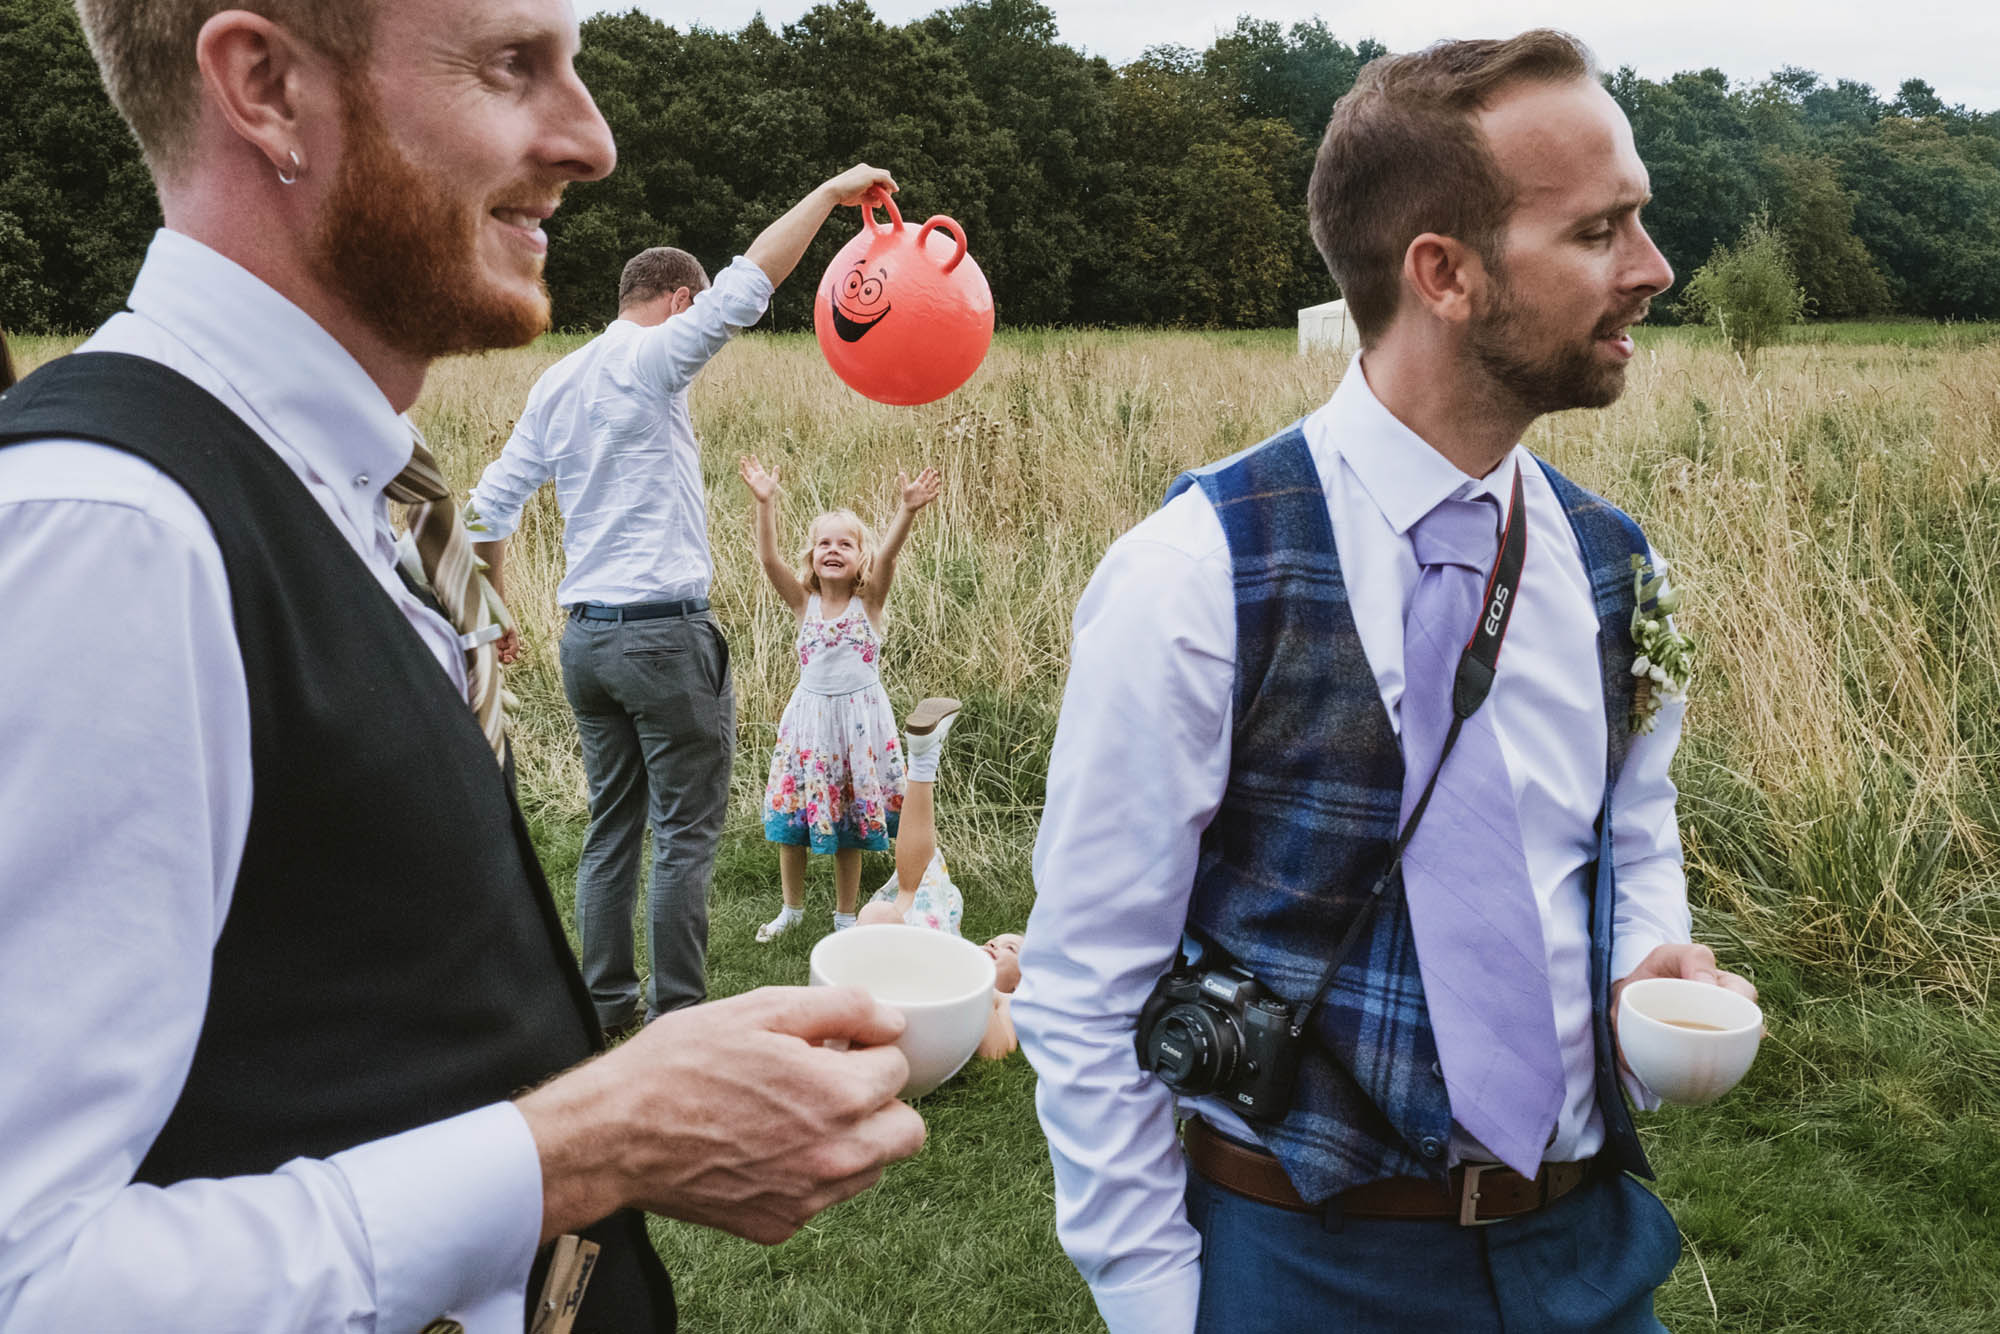 York Place Studios have bases in London and Yorkshire and are some of the best documentary wedding photographers in the UK